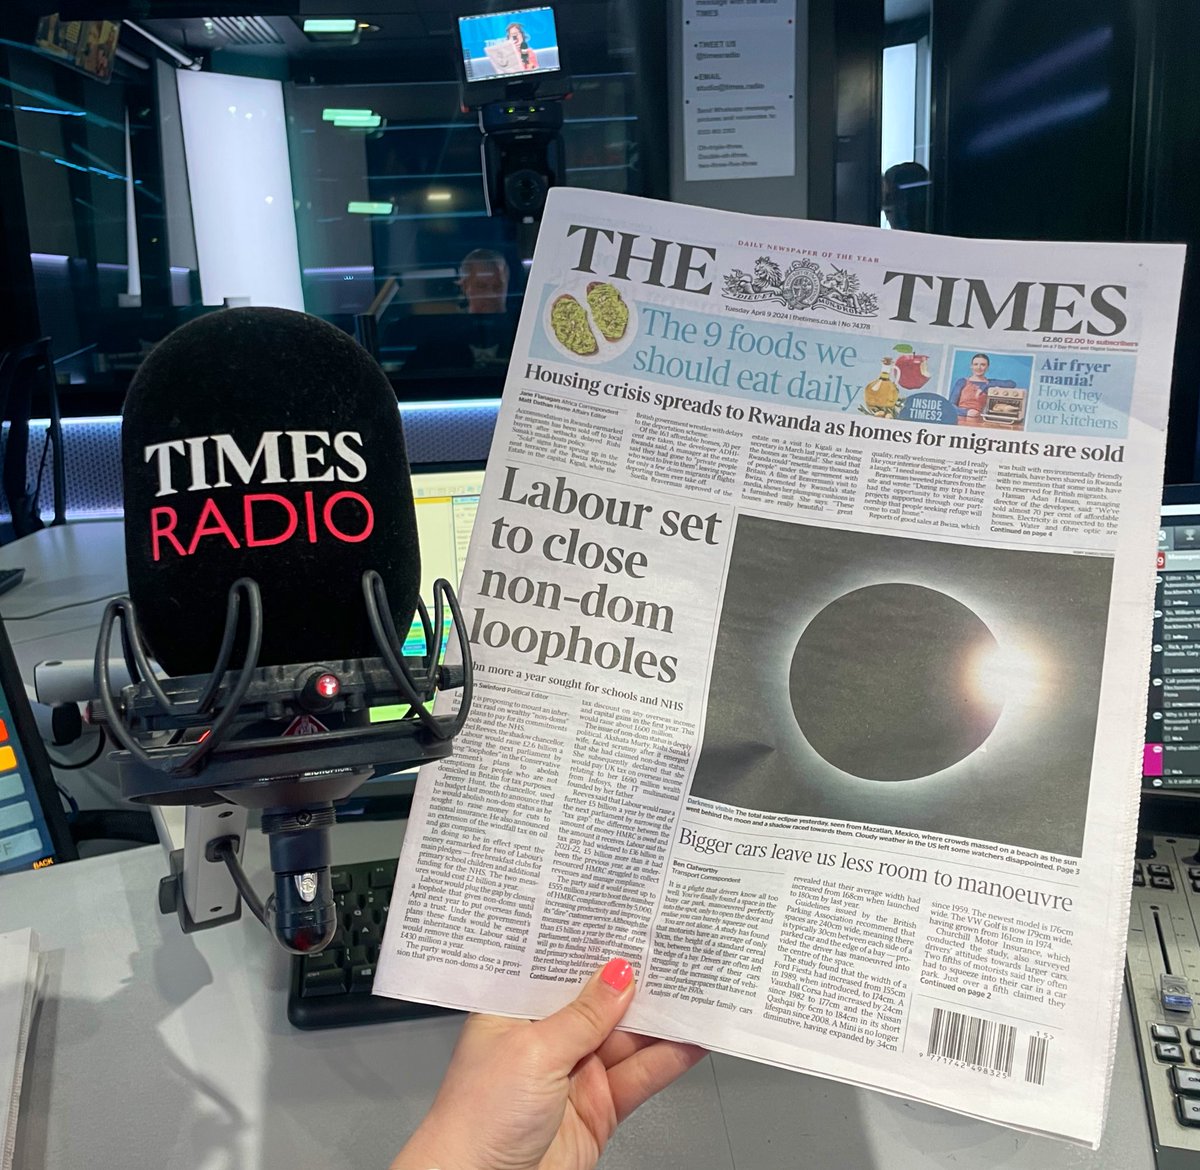 Morning! Join me now @timesradio: 🗳️ Labour’s plans to pay for NHS @vickiiinnes & @realVickyPryce 🍓 The forever chemicals on our fruit and veg @josiecoh 🇺🇸 David Cameron meets Donald Trump 🇮🇪 Ireland’s new Taoiseach @wilso_jam 📰 @BeccaHutson reviews